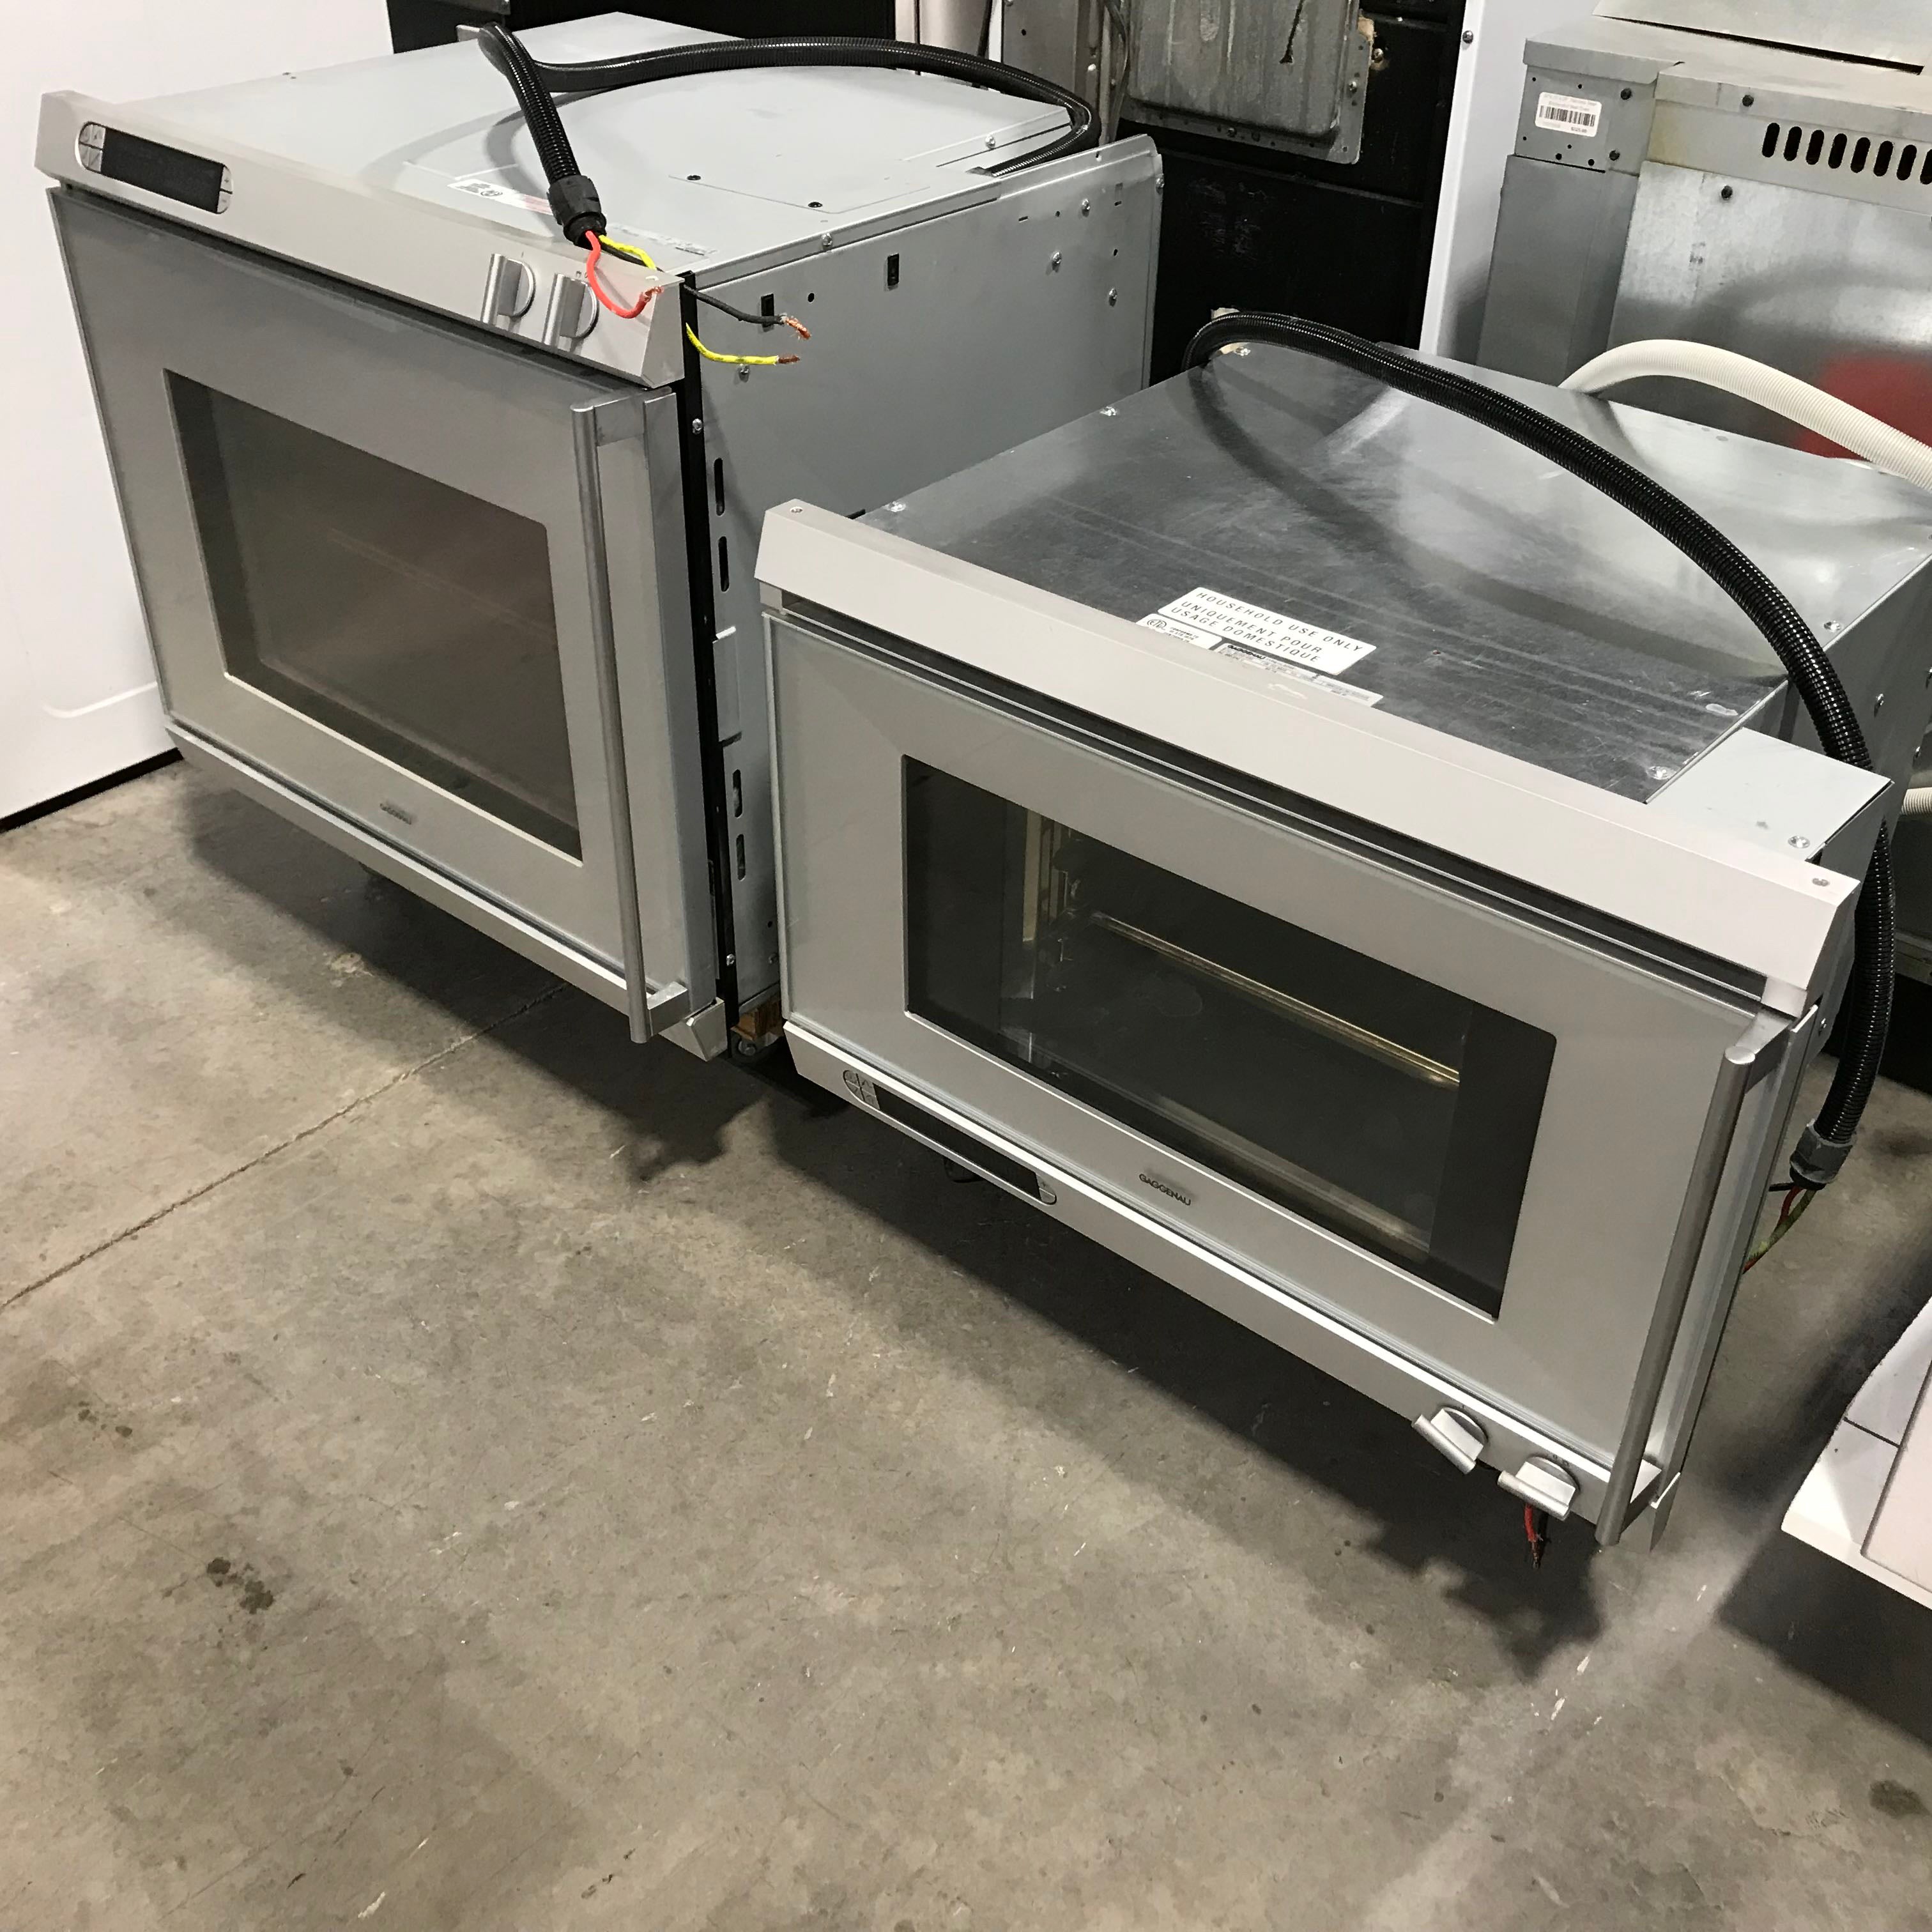 Gaggenau Hled23 Grey Oven Steam Combo and Gaggenau HLEB29 Wall Oven Sold As a Set